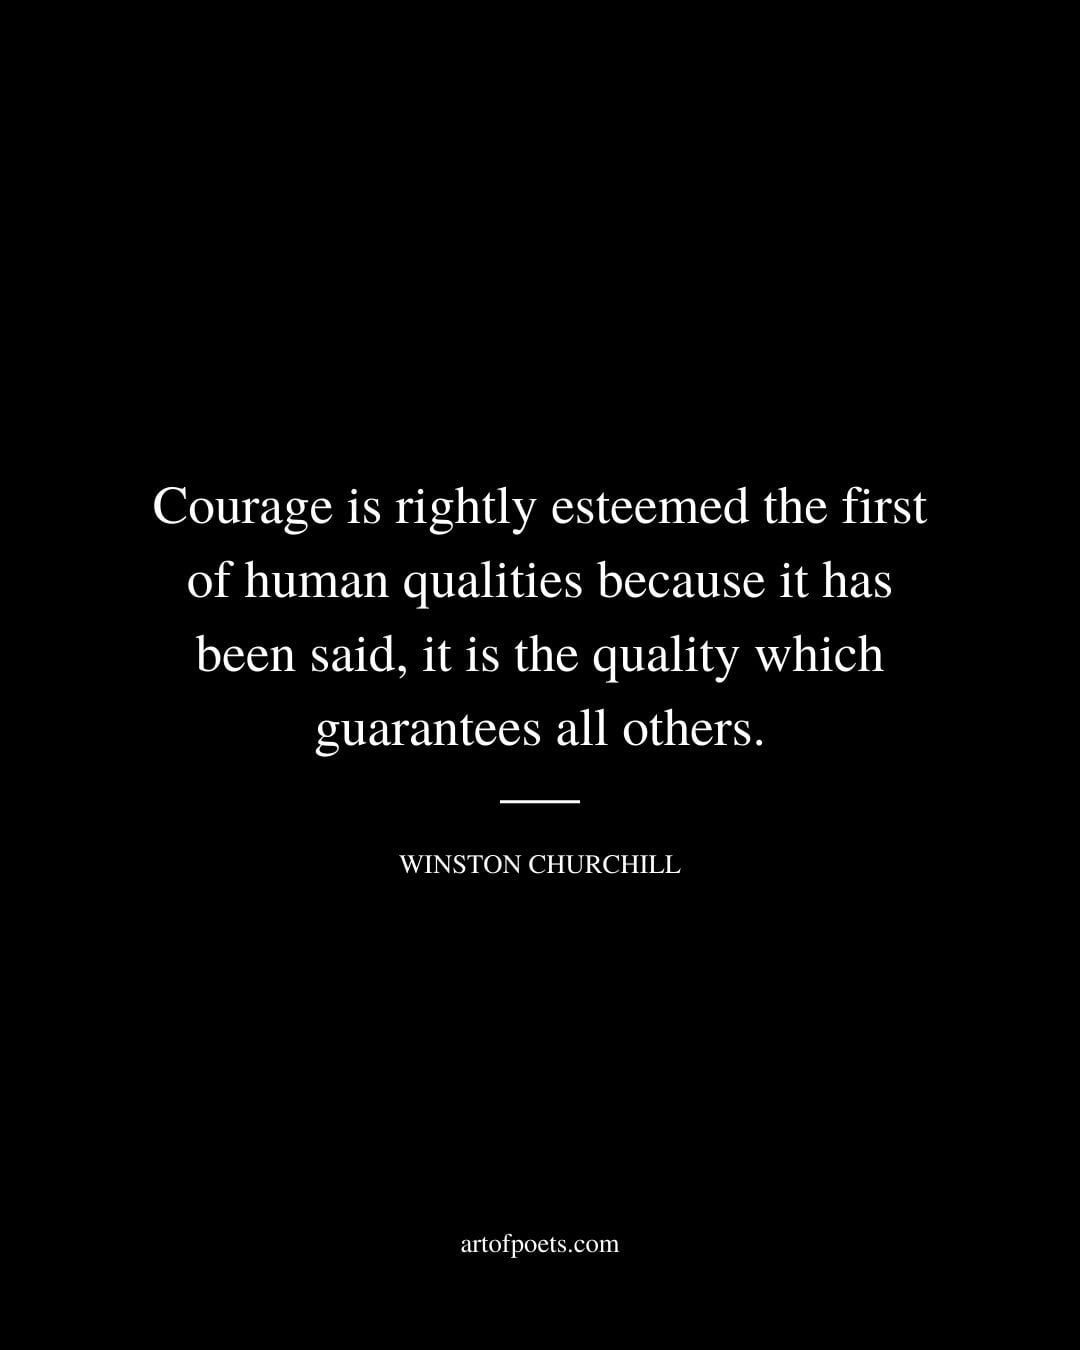 Courage is rightly esteemed the first of human qualities because it has been said it is the quality which guarantees all others